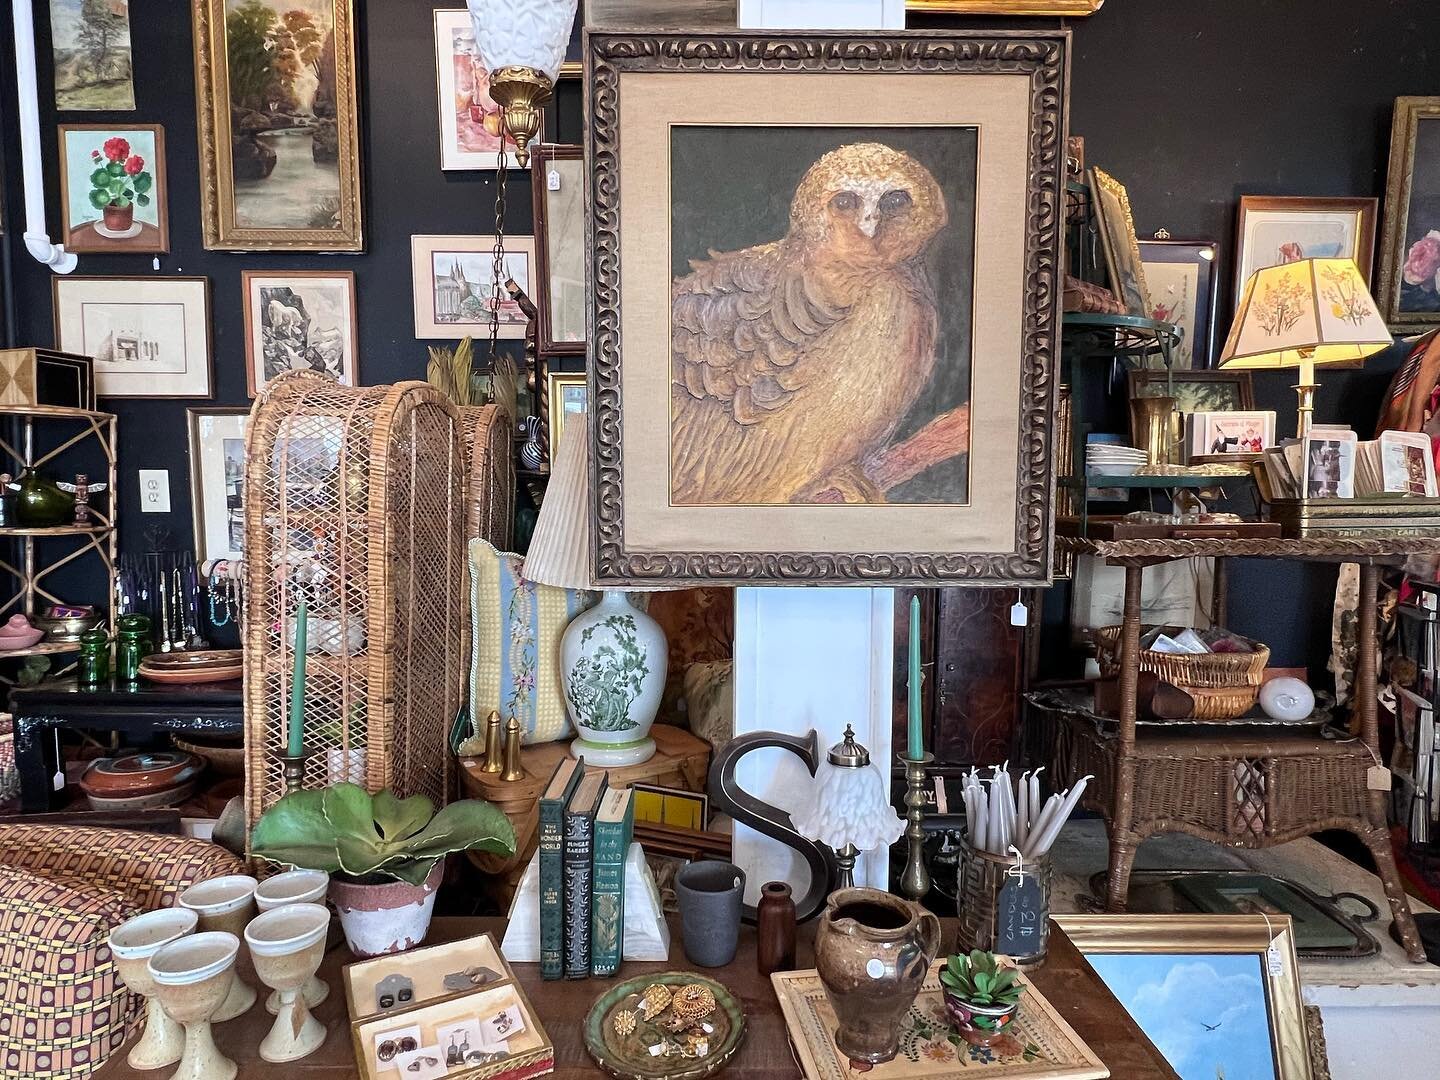 Just in is this amazing Owl 🦉 painting I picked up over the weekend. It is the coolest. Honestly it was a very busy day unloading everything out of my car and into the store. So many fun 🤩 vintage items. I&rsquo;ll be posting additional pictures ov